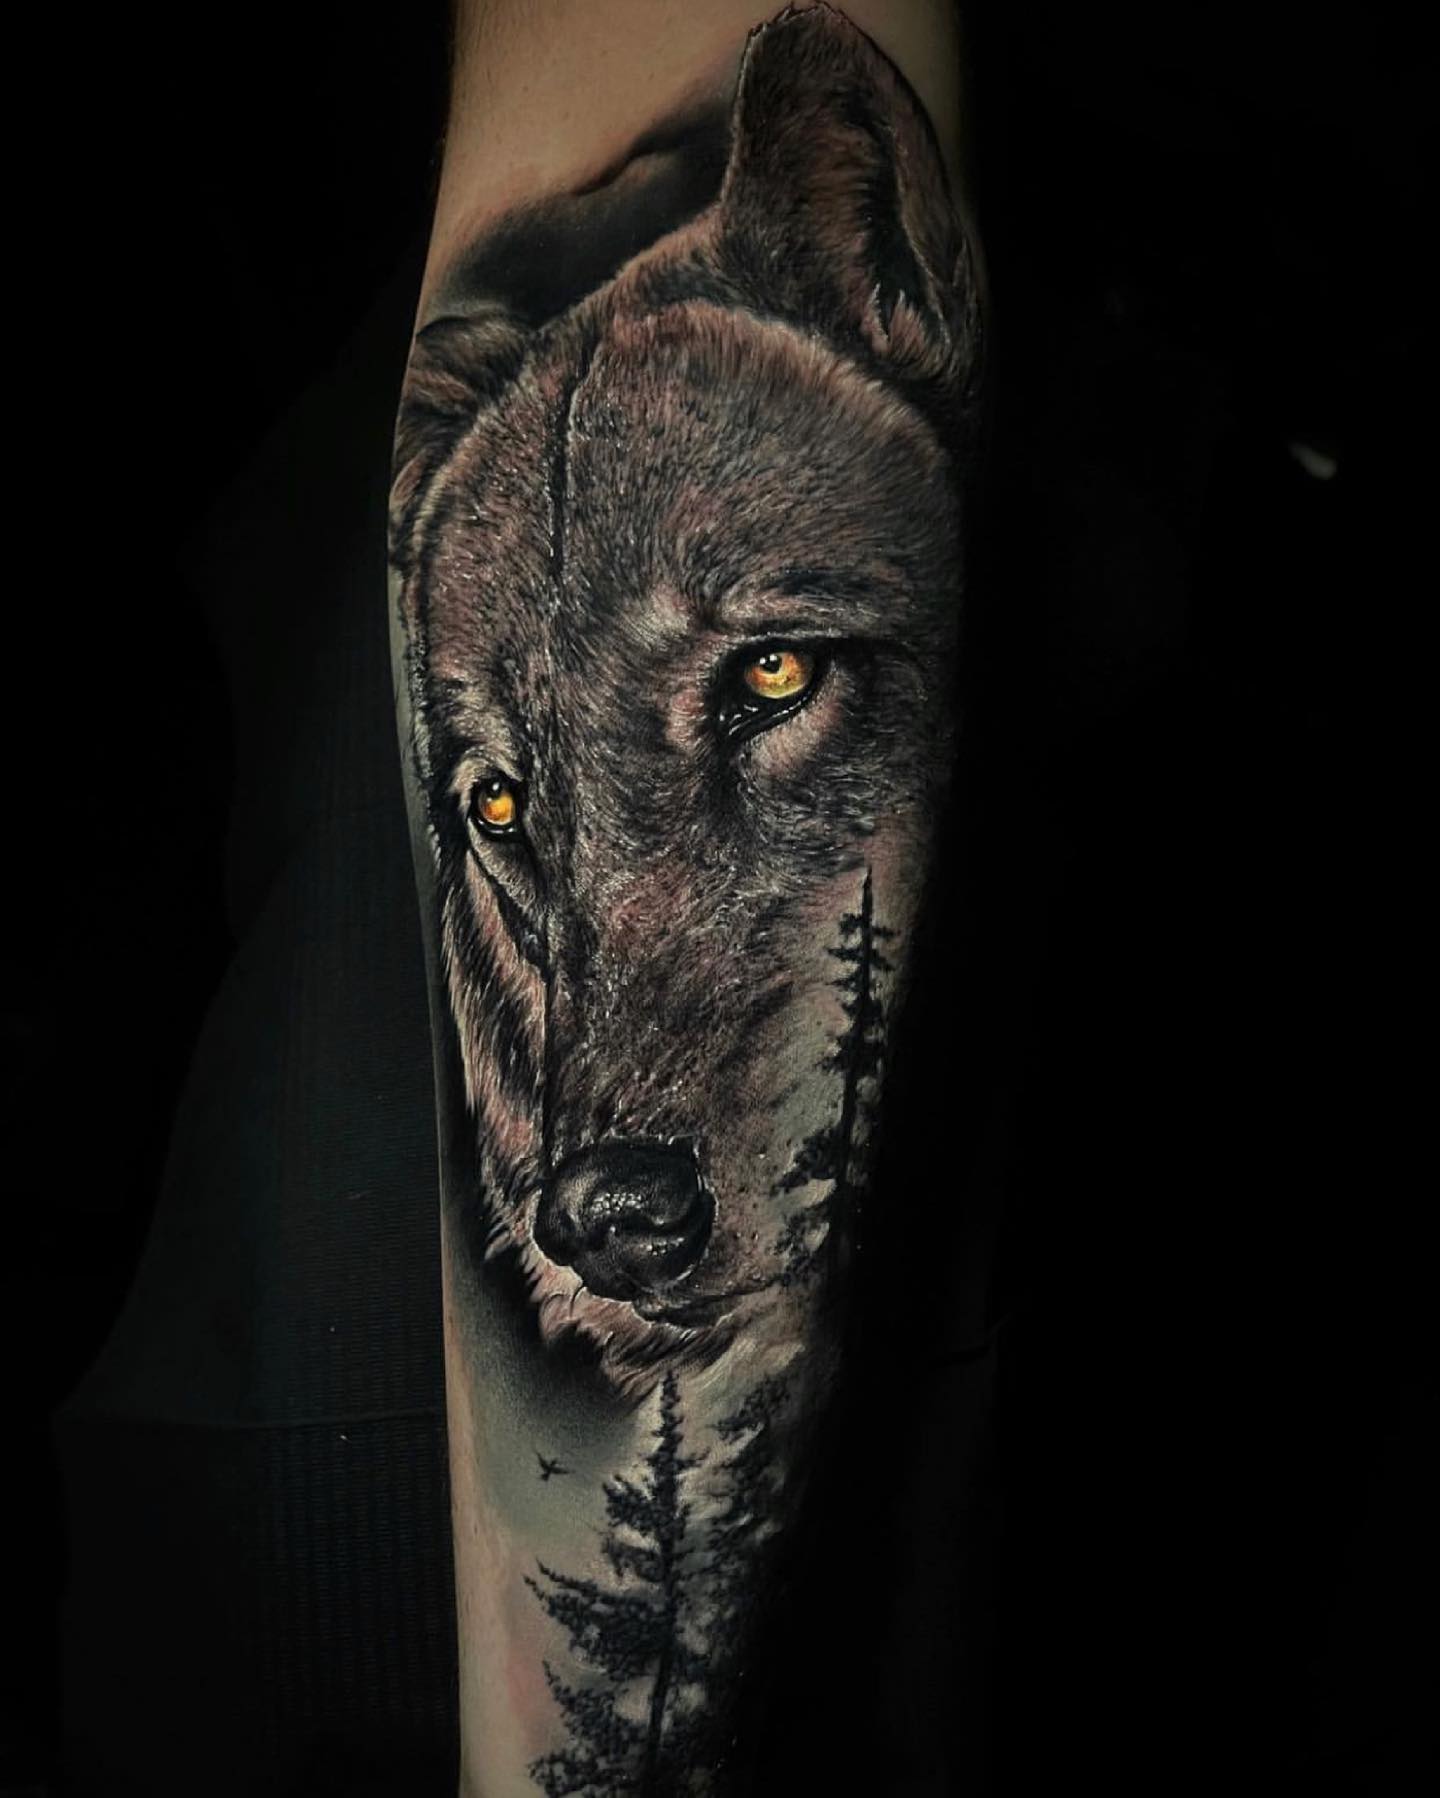 Wolf goes grrr 🐺
•
A wolf guy from the one and only  youngcaviartattoo . If you’re looking for this kind of style, Omar is your best bet. To enquire, contact reception through the link in the bio or Omar directly 💁🏼‍♀️
•
             